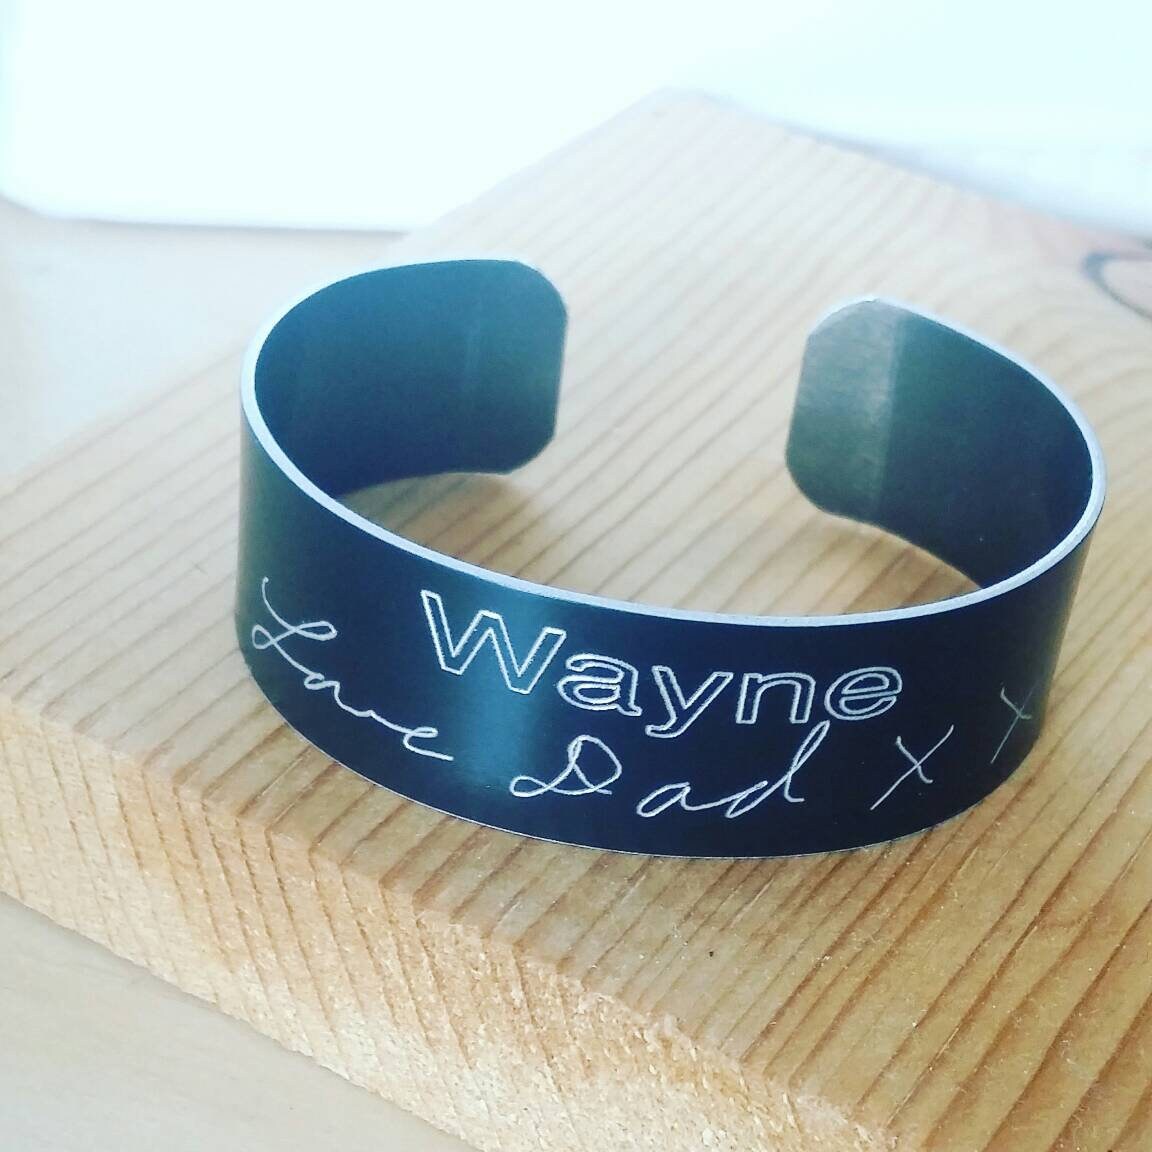 Custom engraving on Black cuff, fathers day gift from daughter